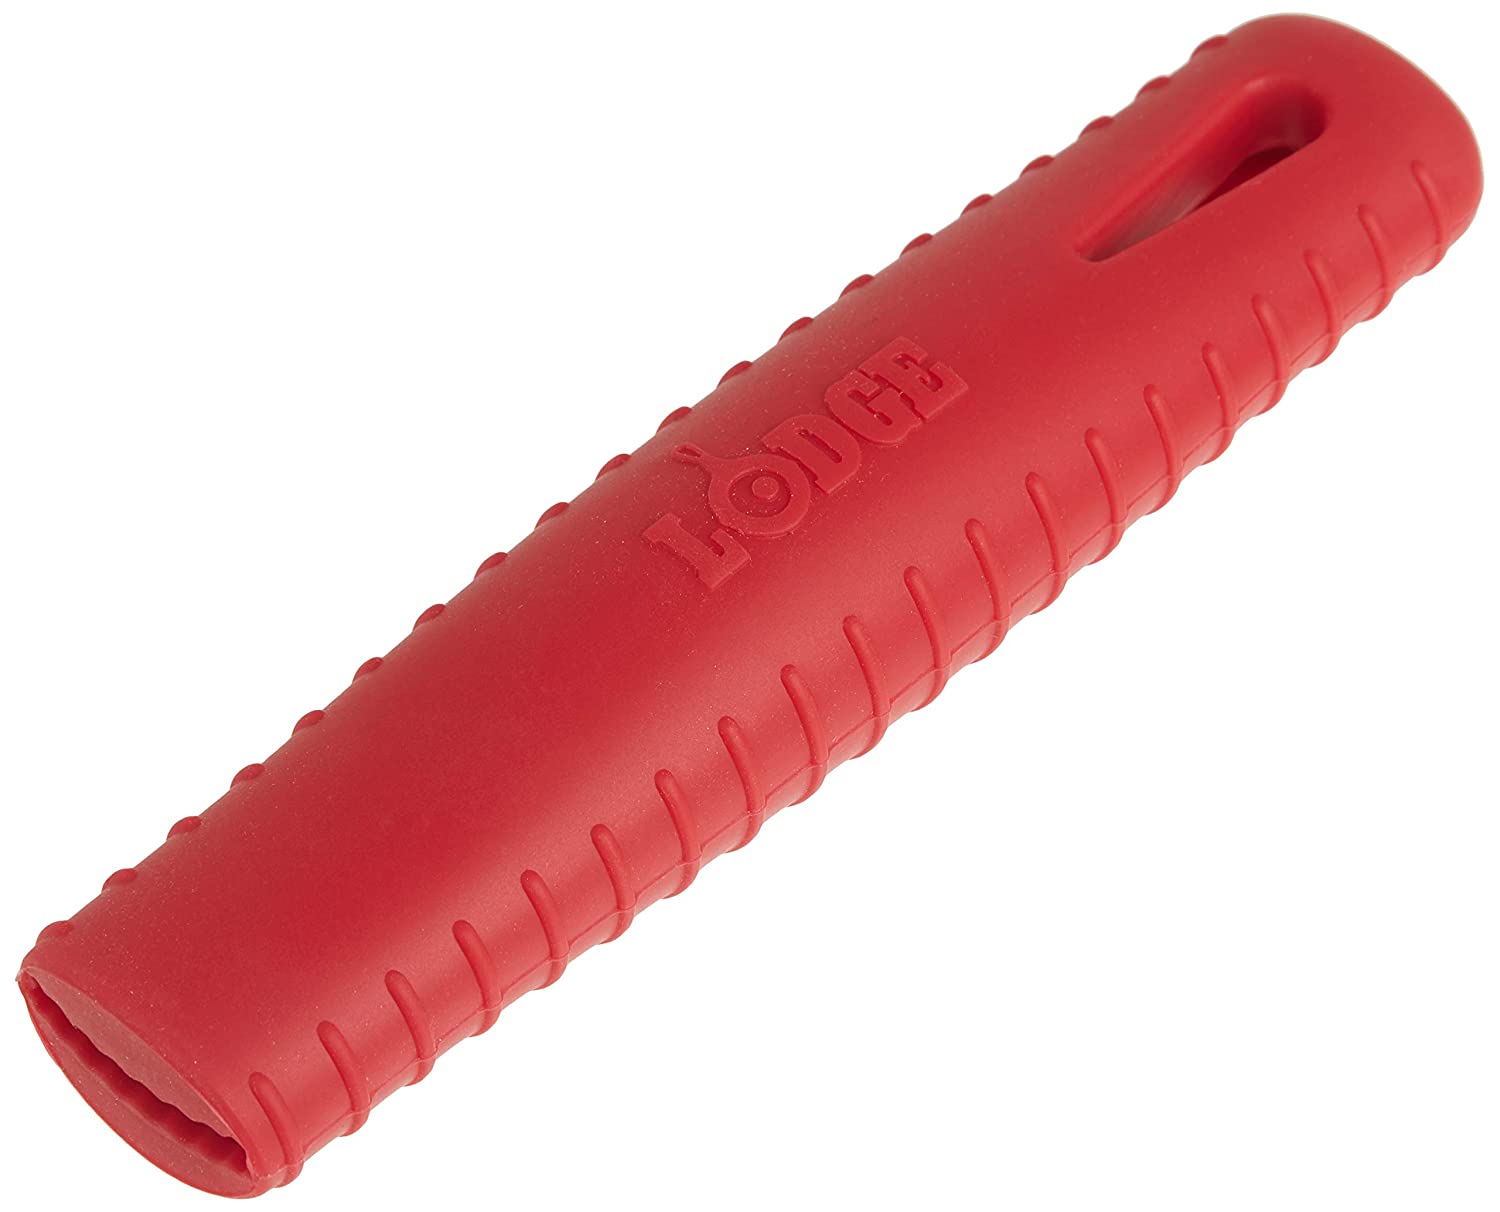 Lodge - Red Silicone Hot Handle Holder for Seasoned Carbon Steel Skillets